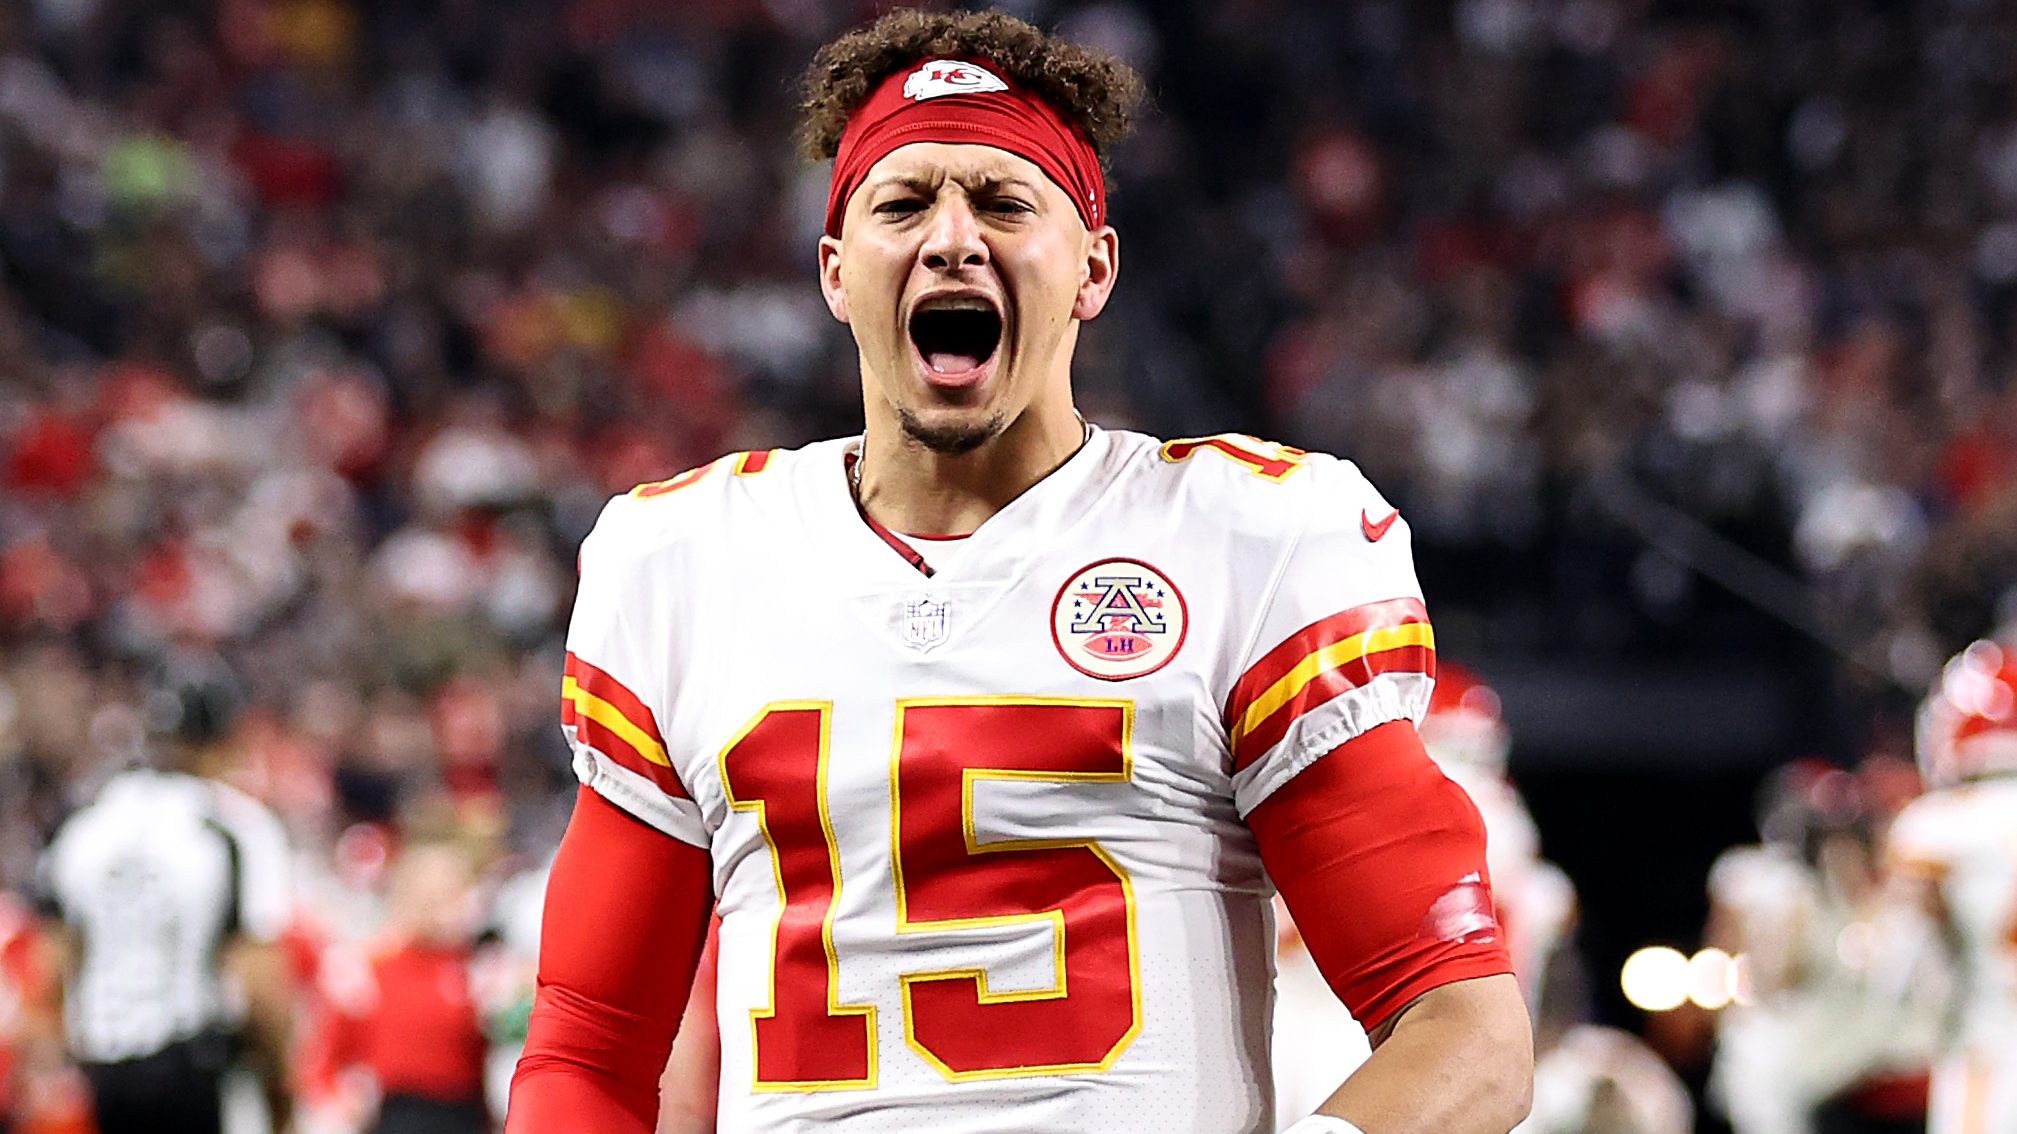 Patrick Mahomes Hypes Up His Chiefs Teammates After Win Over Bills